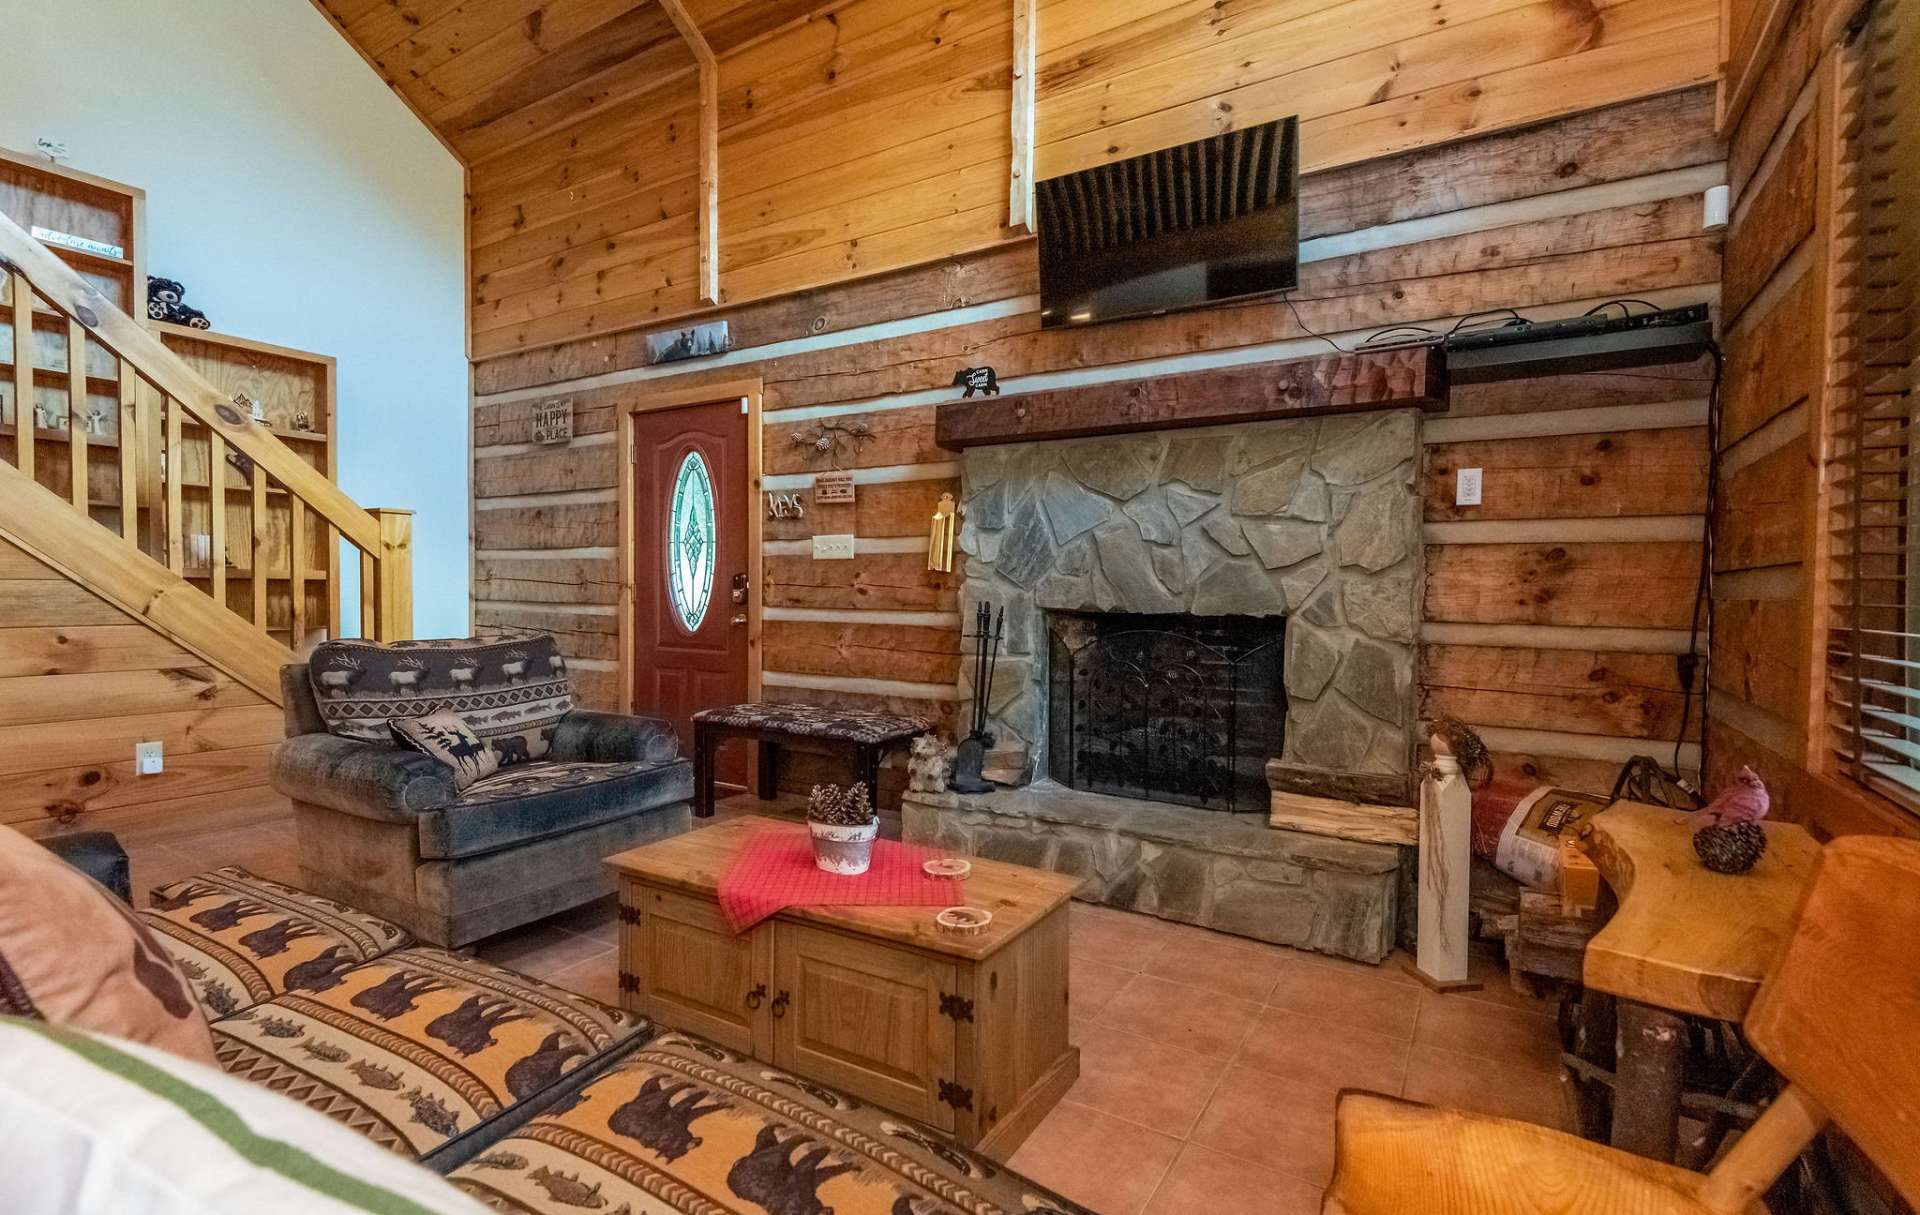 The gas log fireplace will brighten and warm the cool evenings in the mountains.